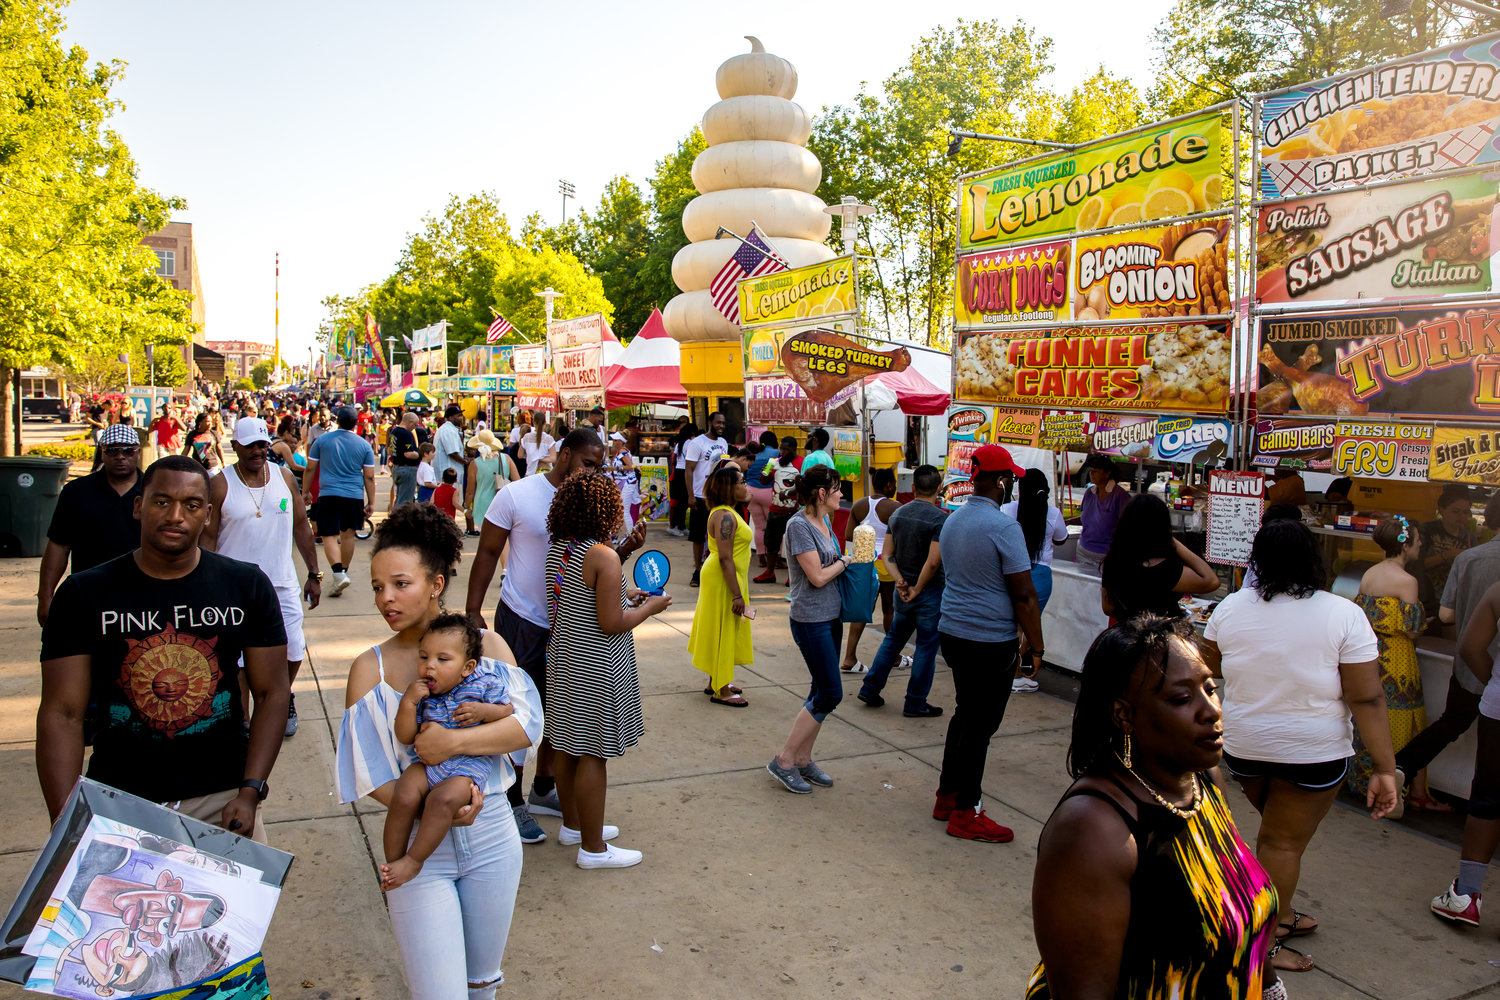 People gather at the food booths during the 2019 Fayetteville Dogwood Festival.